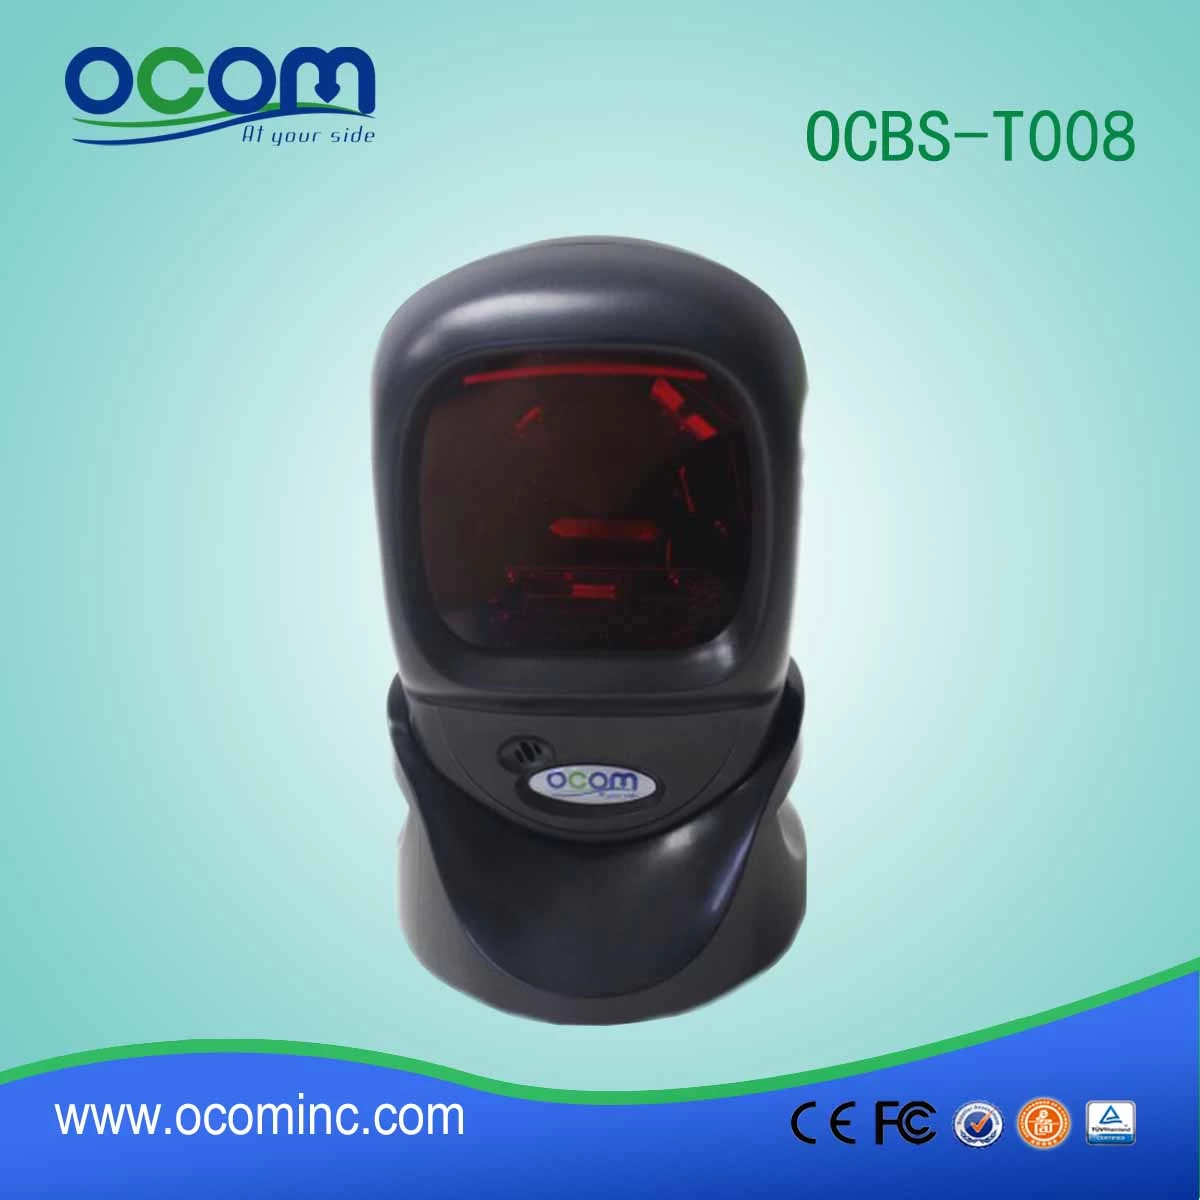 Omni directional desktop usb barcode scanner with long distance-OCBS-T008